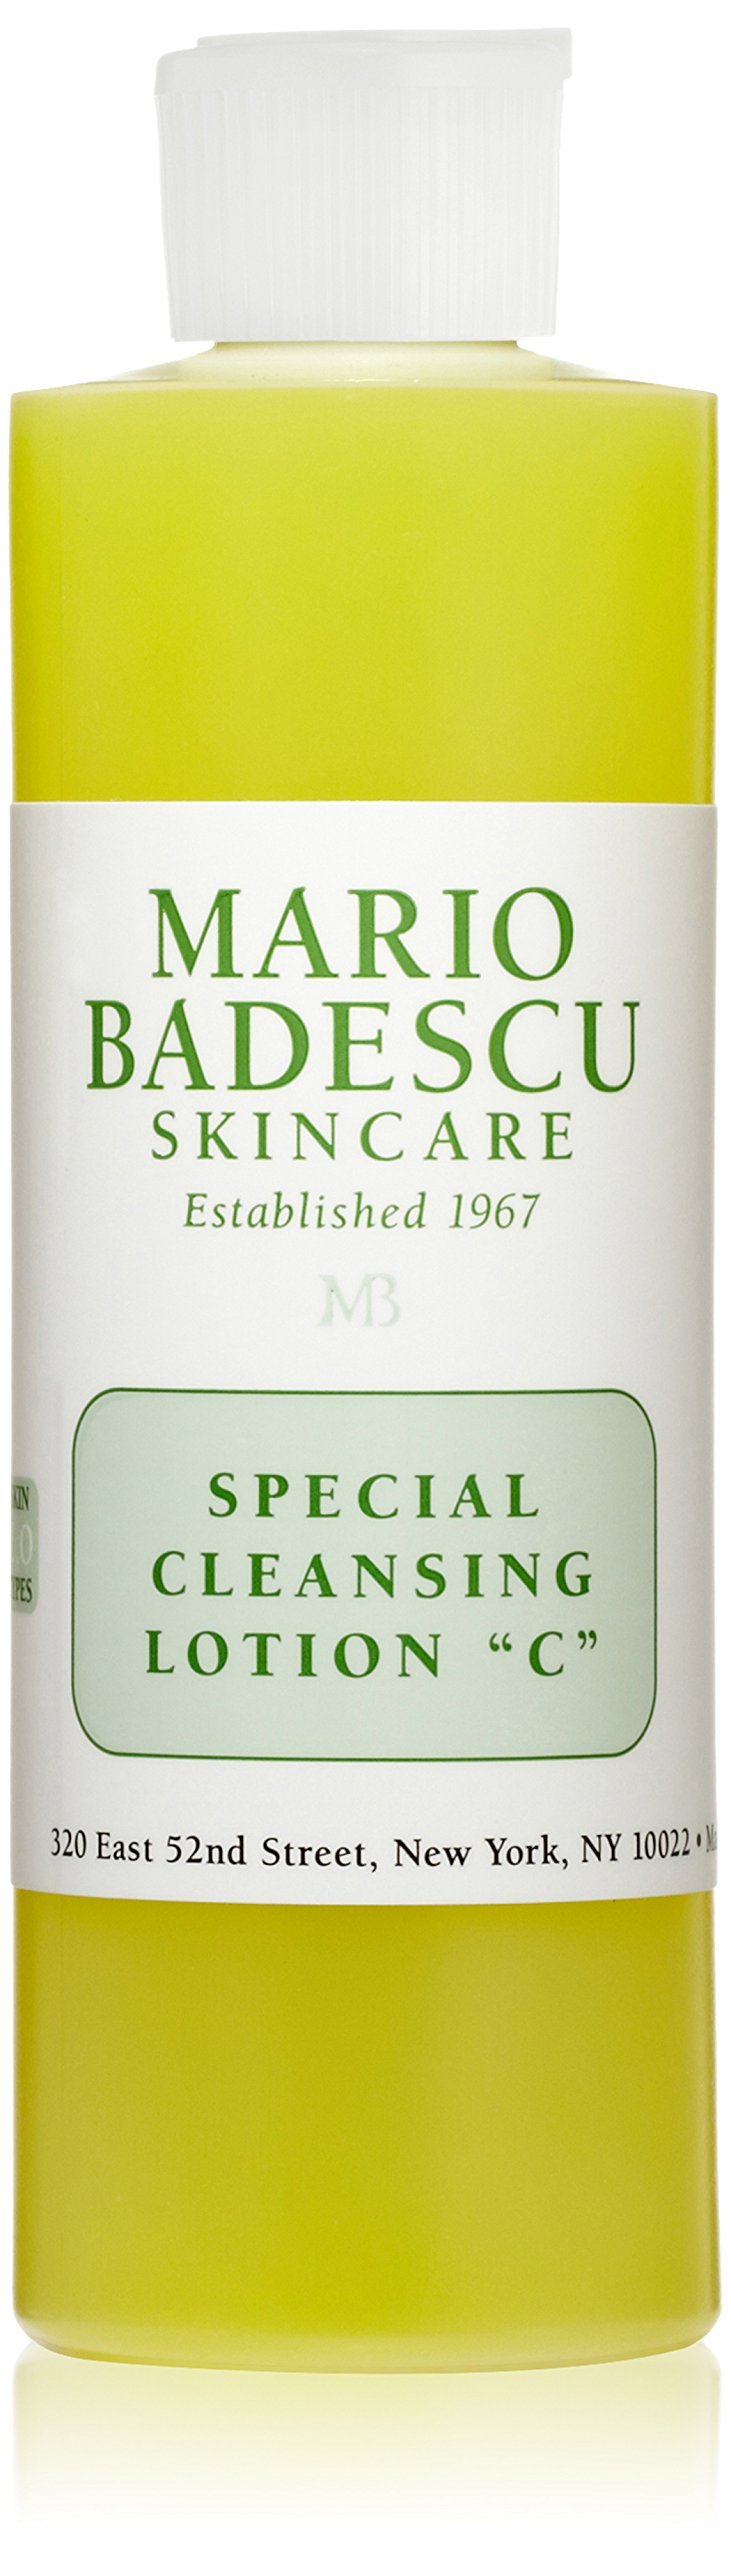 Mario Badescu - Special Cleansing Lotion C - - Combination/ Oily Skin Types - 236ml/8oz